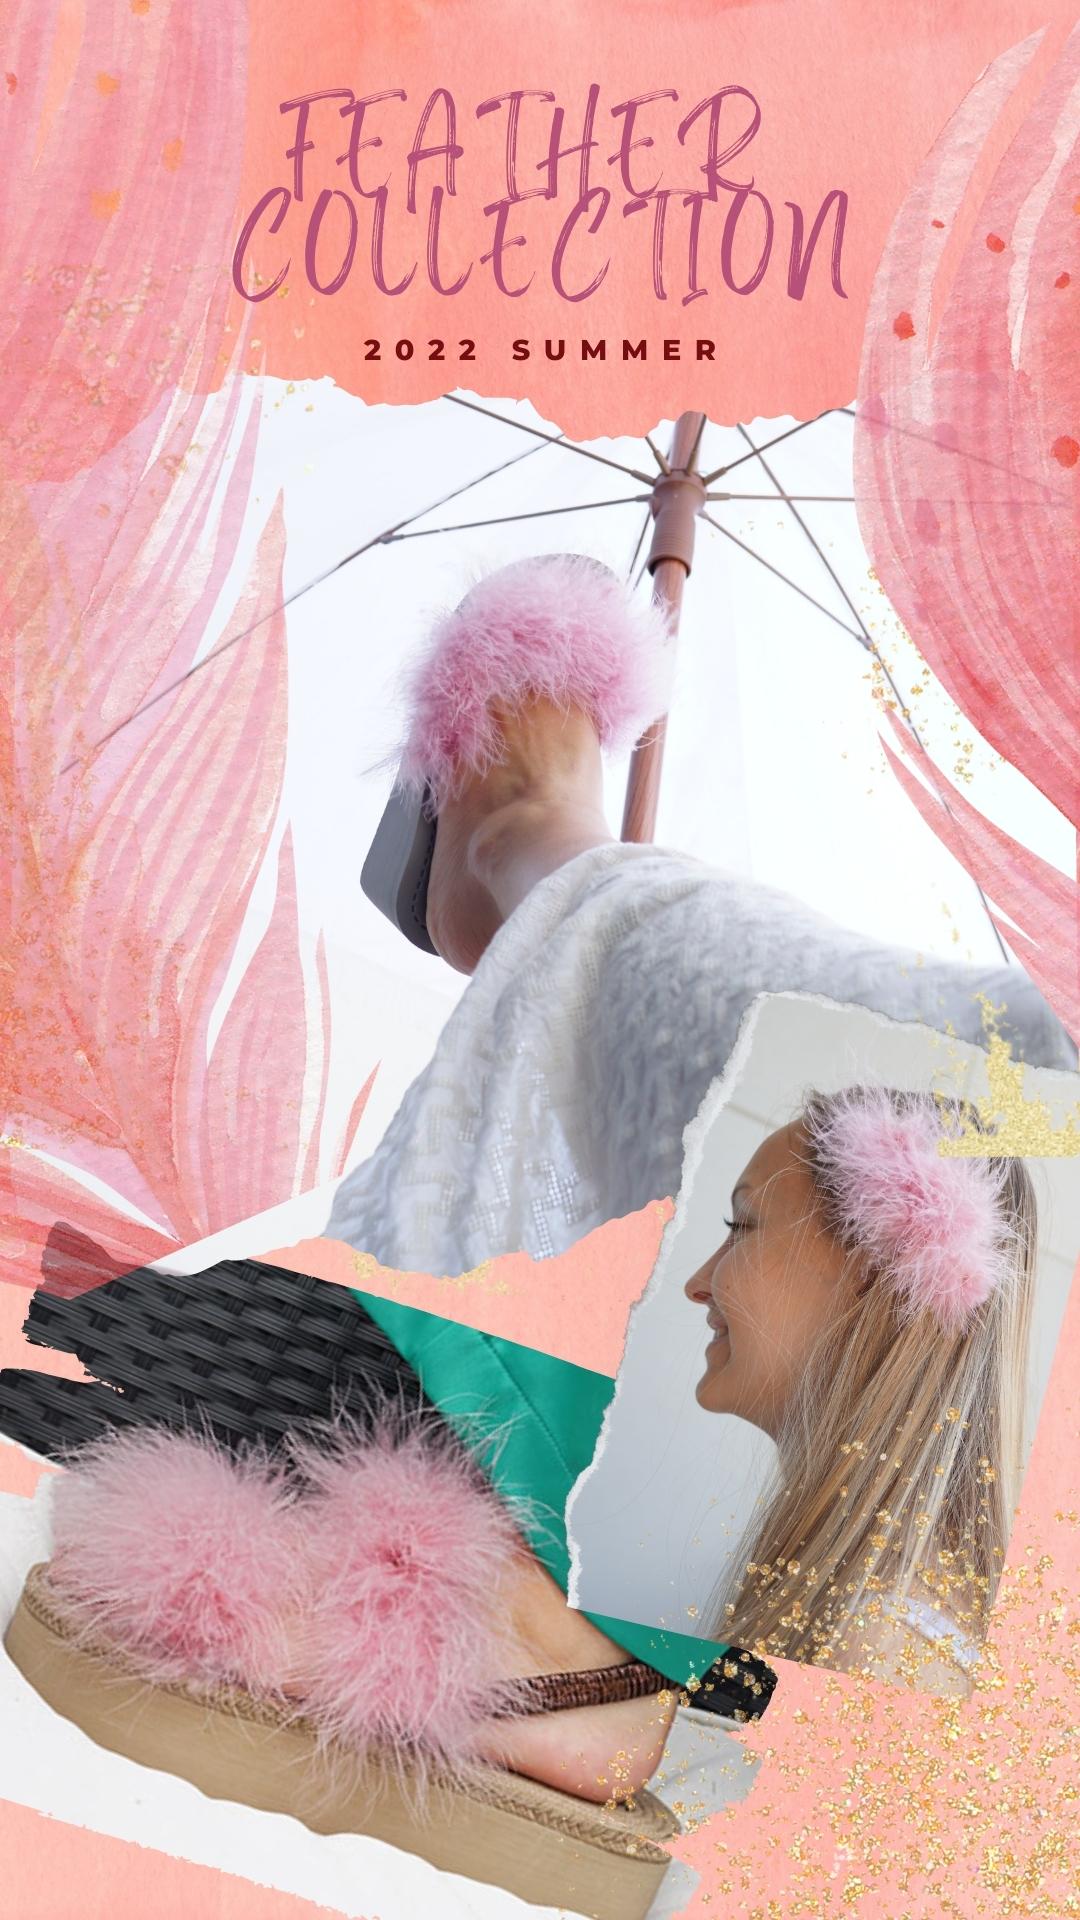 Pink Feather collection has arrived